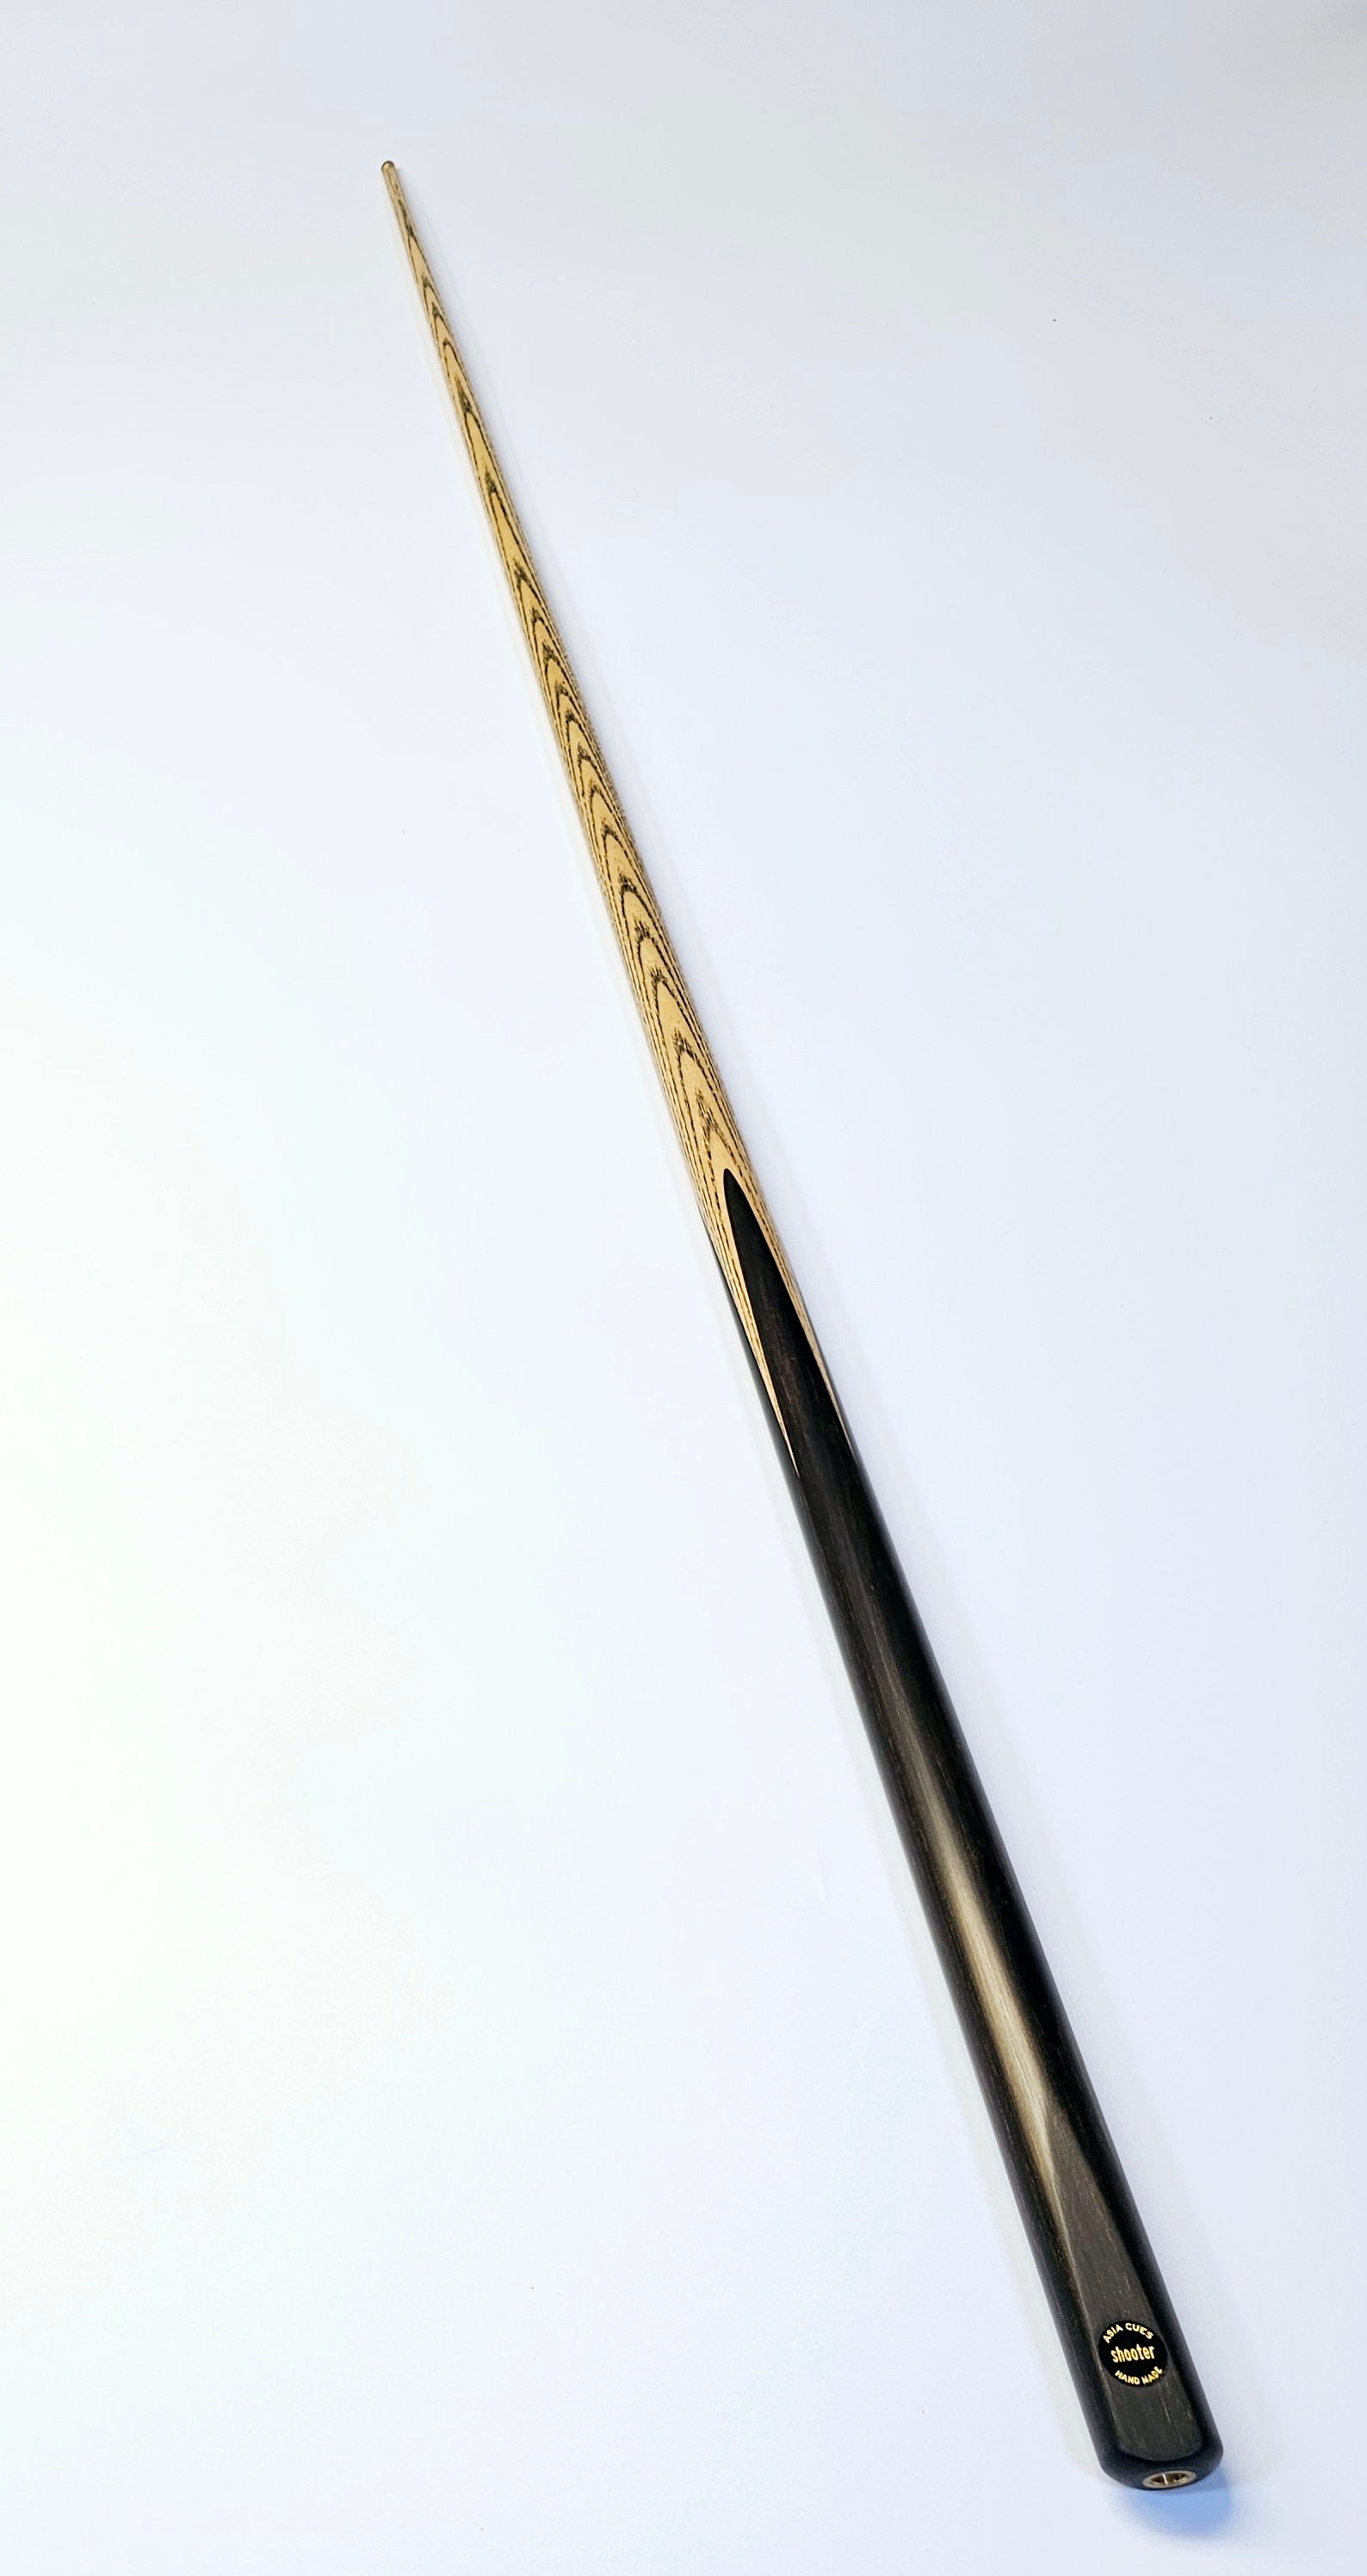 Asia Cues Shooter - One Piece Snooker Cue 9.7mm Tip, 17.9oz, 58"